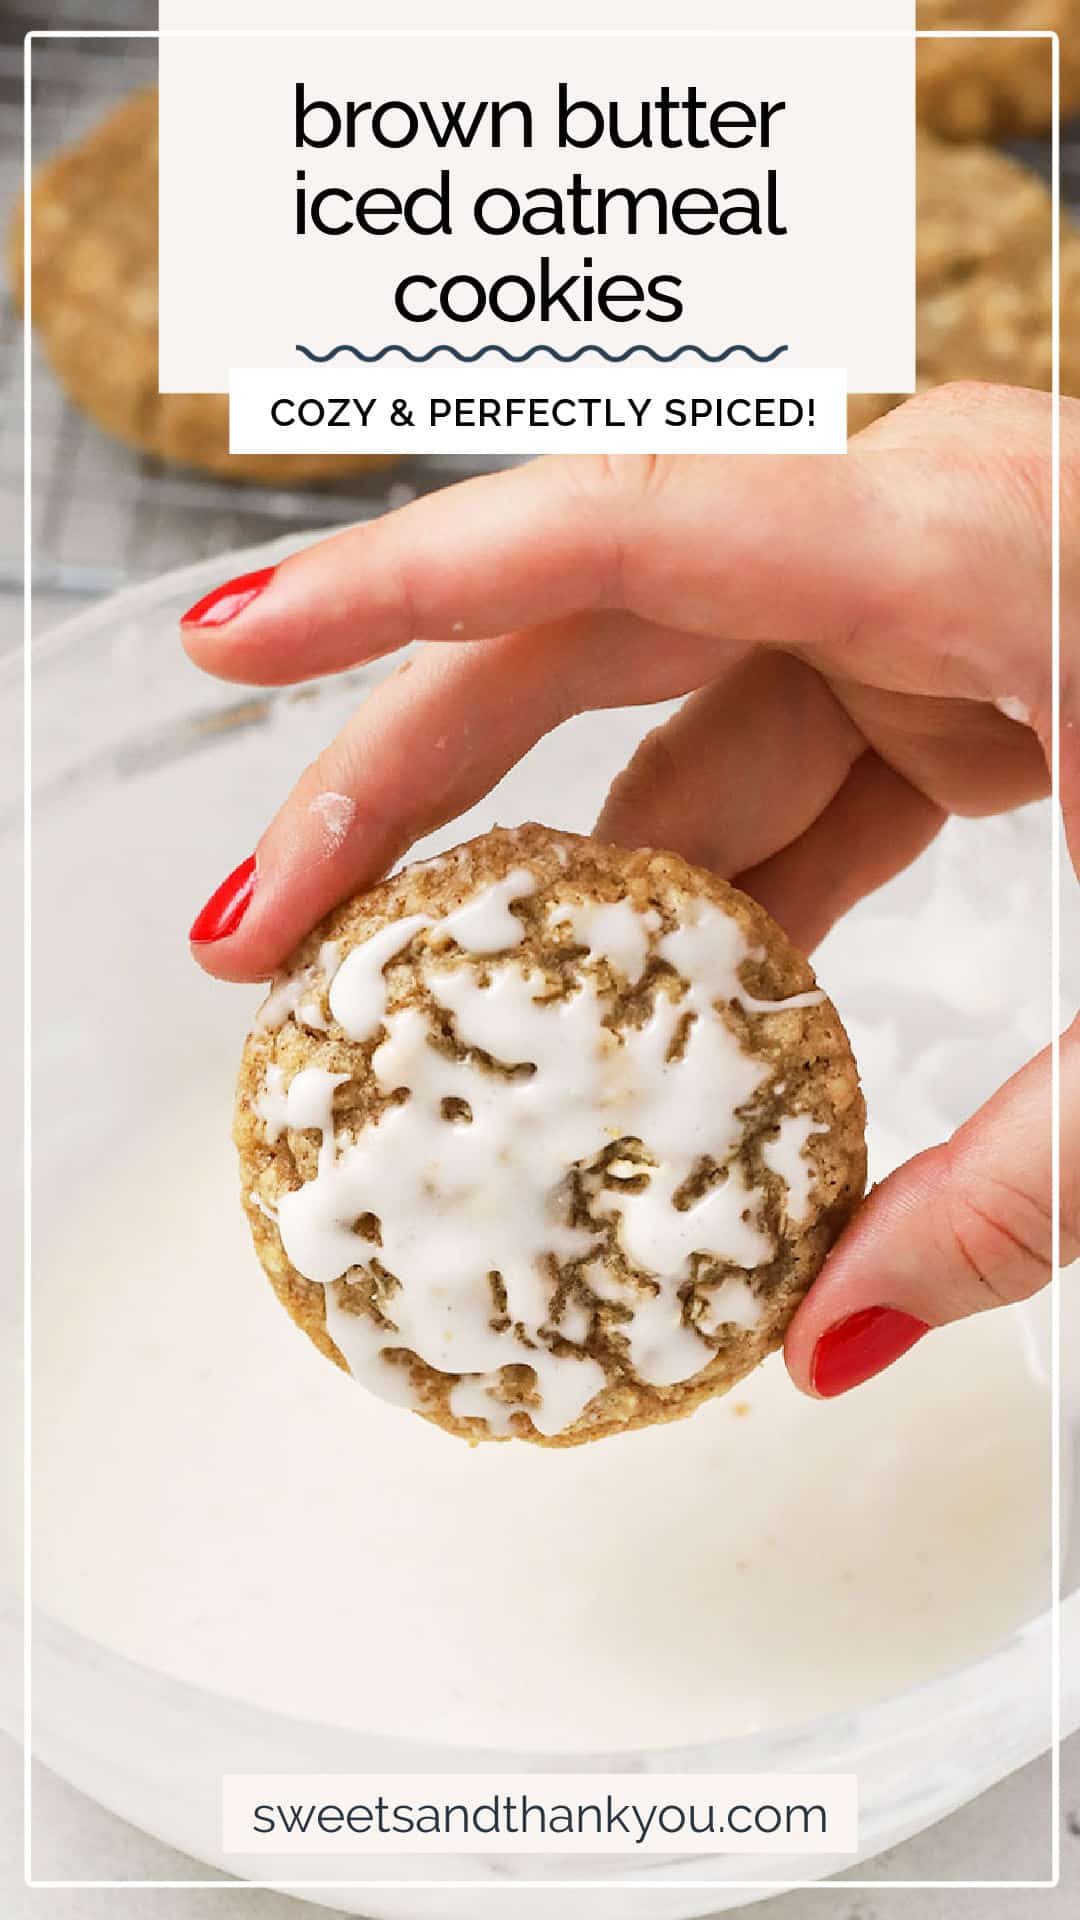 These gluten-free iced oatmeal cookies are made with brown butter, warm spices, and a simple sweet glaze. They're cookie perfection! / gluten free oatmeal cookies / gluten-free christmas cookies / gluten free holiday cookies / gluten free spice cookies / gluten free glazed oatmeal cookies / brown butter oatmeal cookies recipe / gluten free cookies with glaze / gluten free old fashioned iced oatmeal cookies / gluten free cinnamon cookies